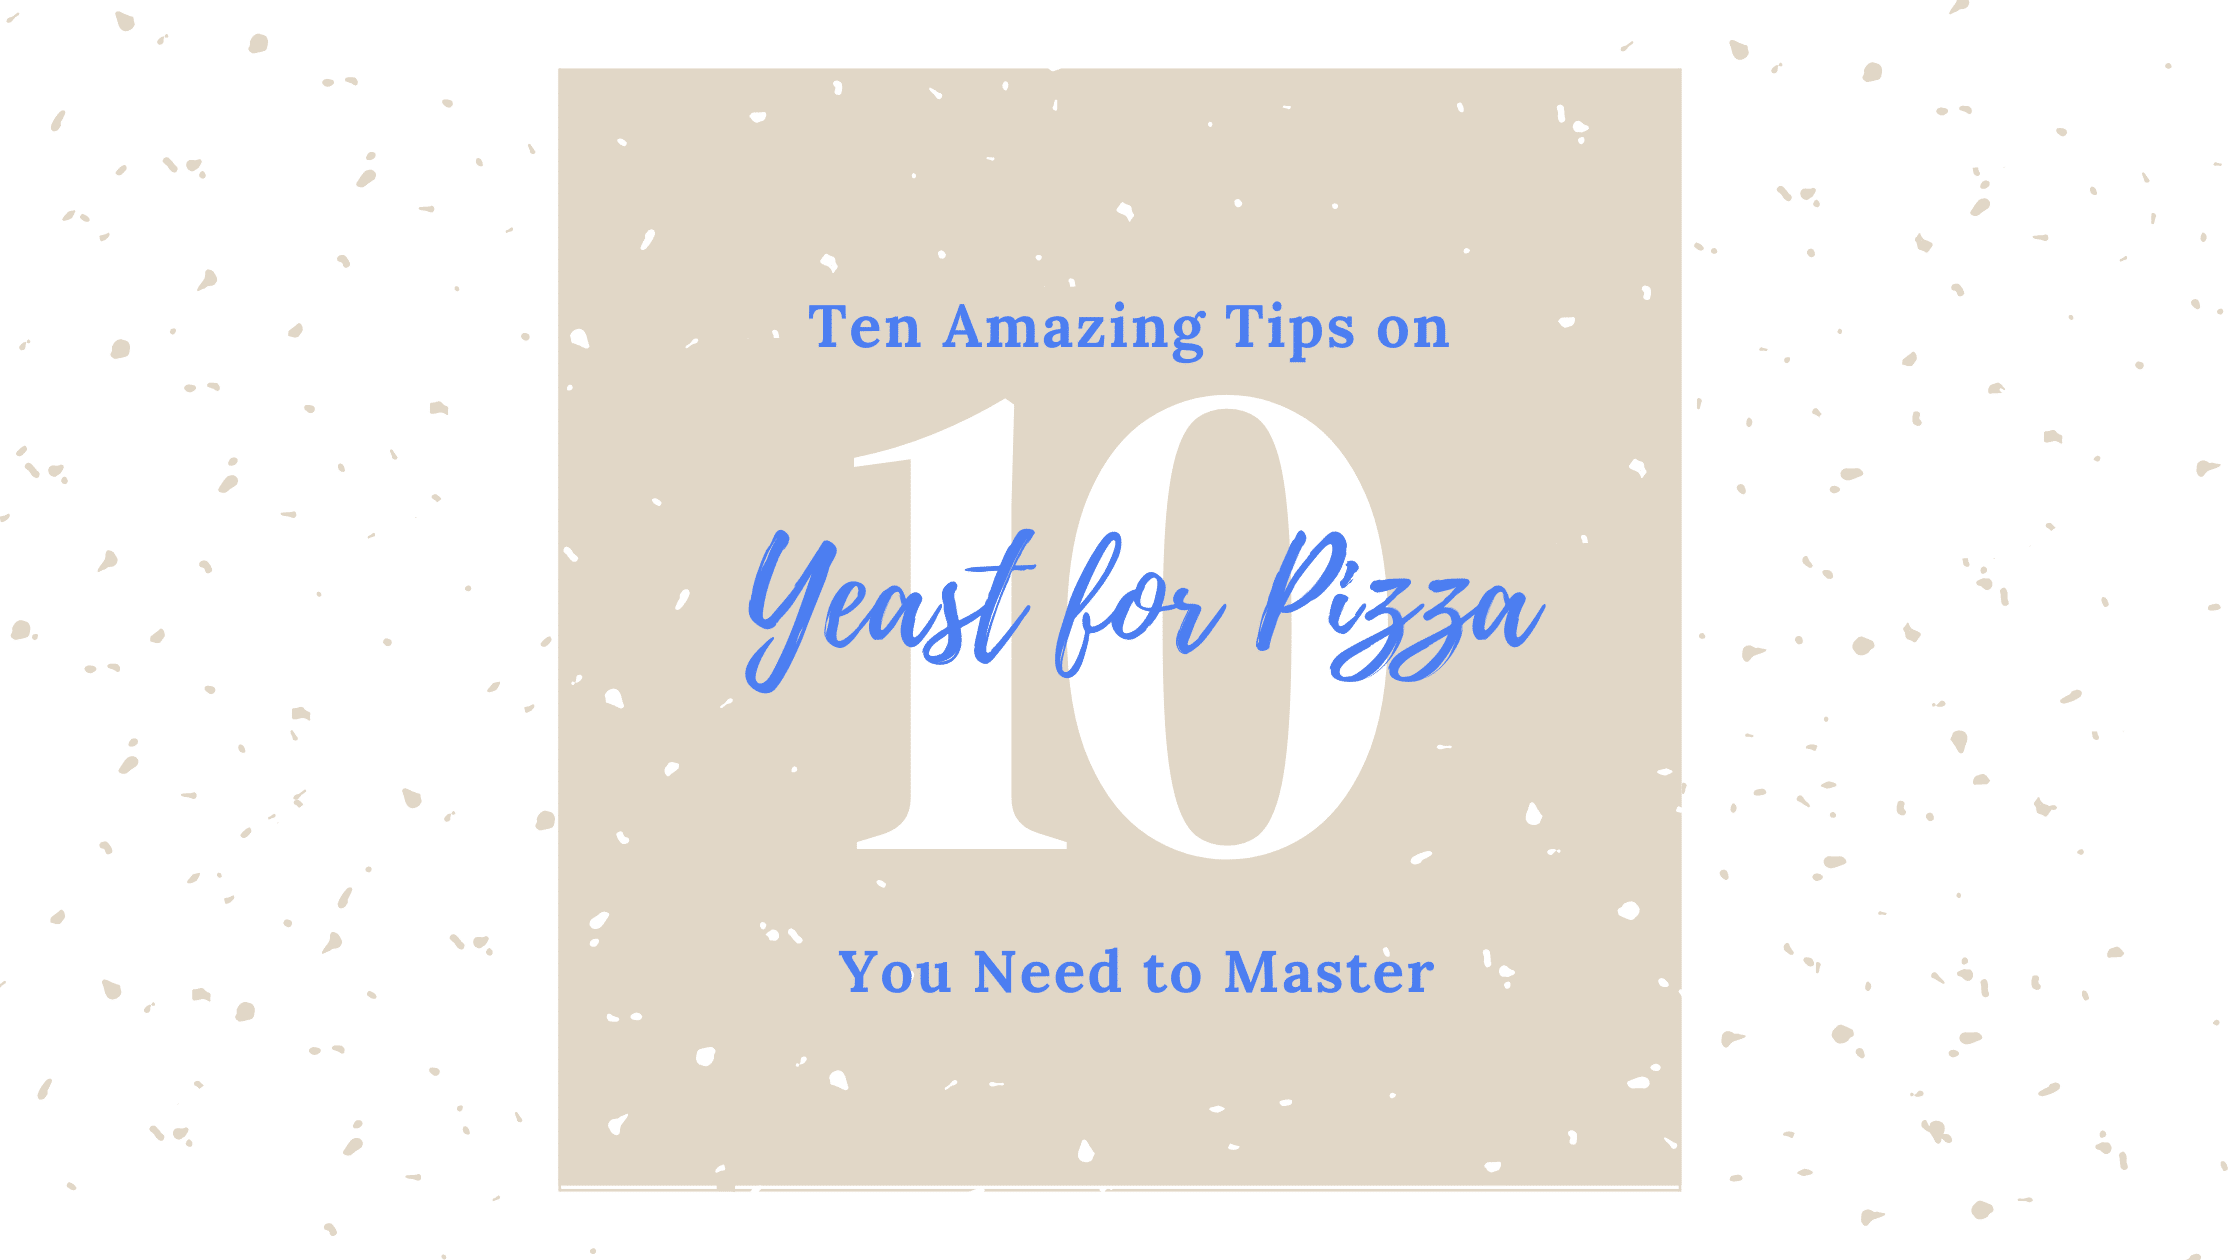 10 Amazing Yeast Tips for Pizza Dough You Need to Master